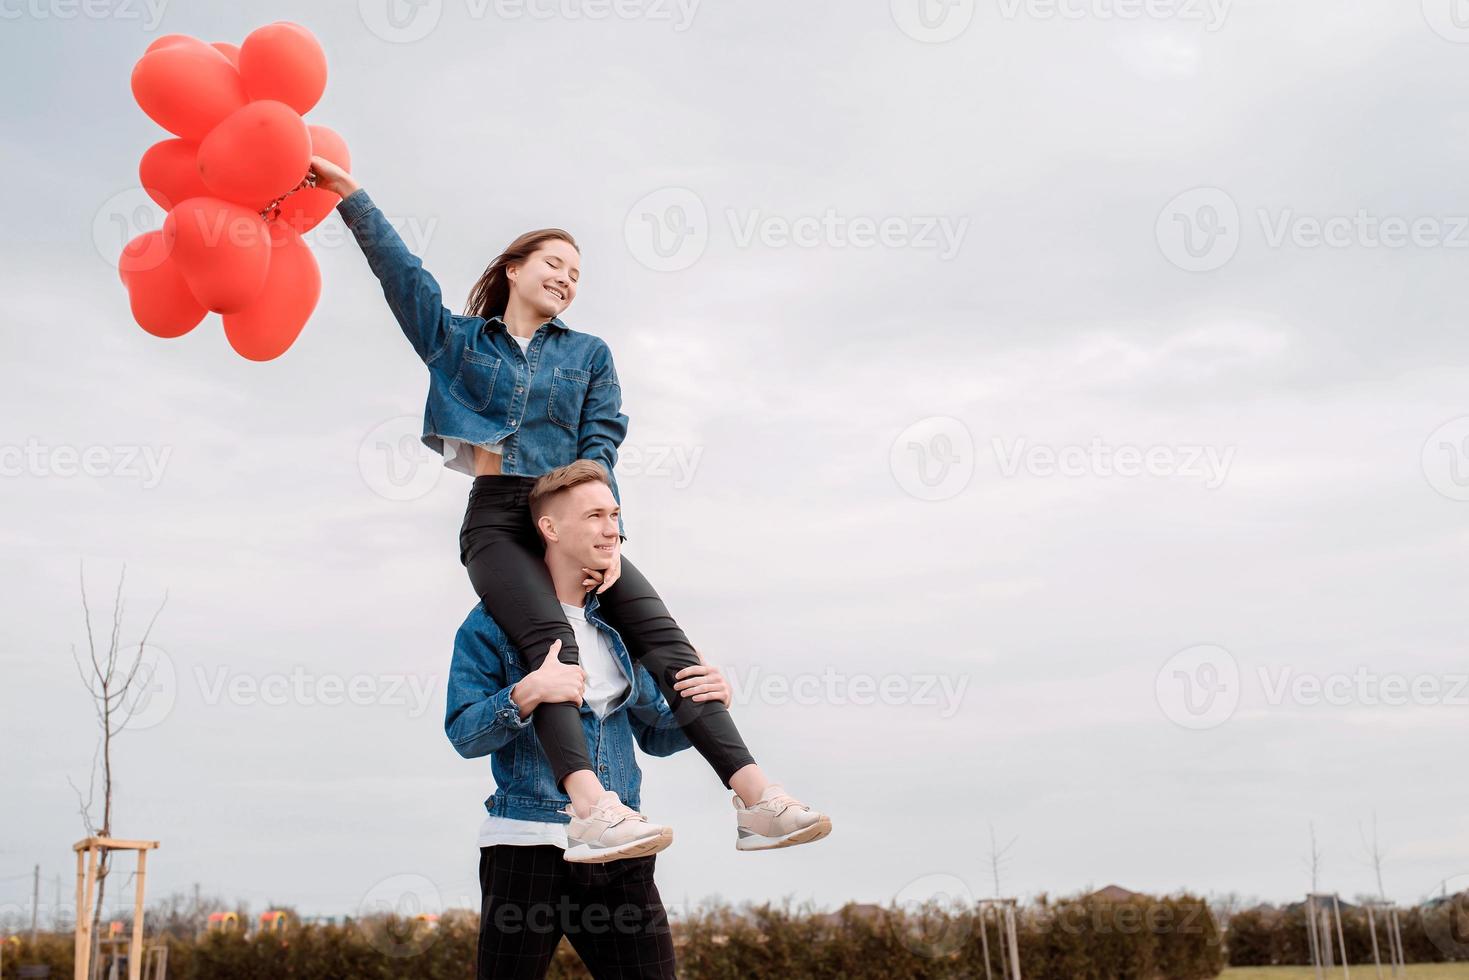 young loving couple with red balloons embracing outdoors having fun photo